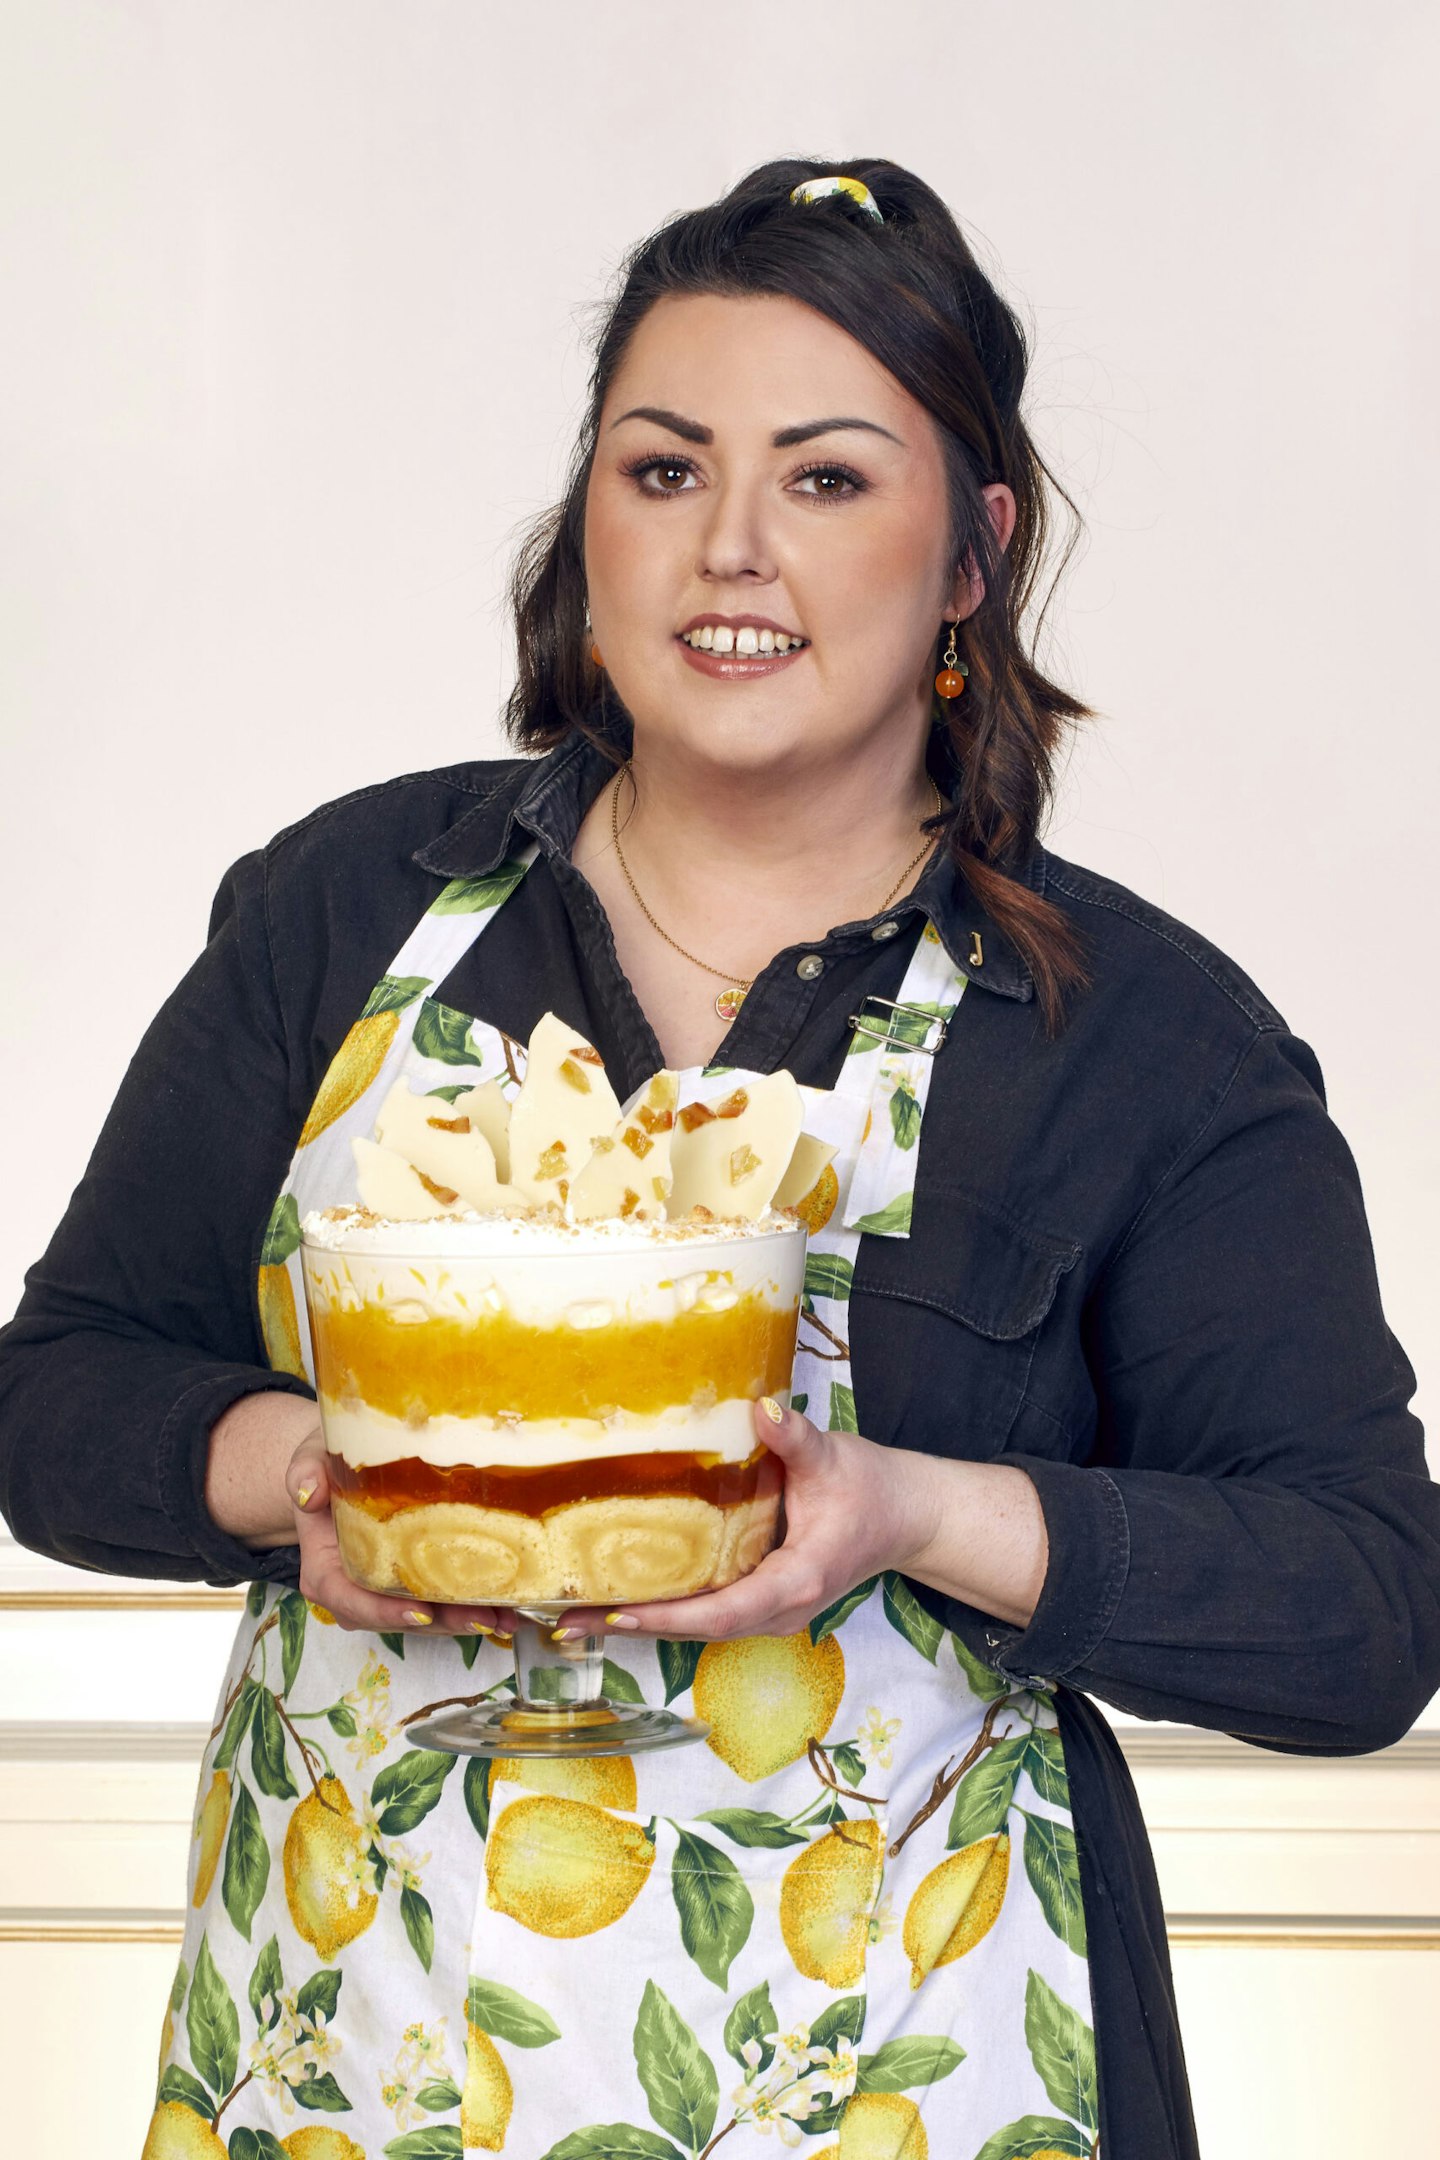 Jemma Melvin, winner of the Jubilee Pudding competition